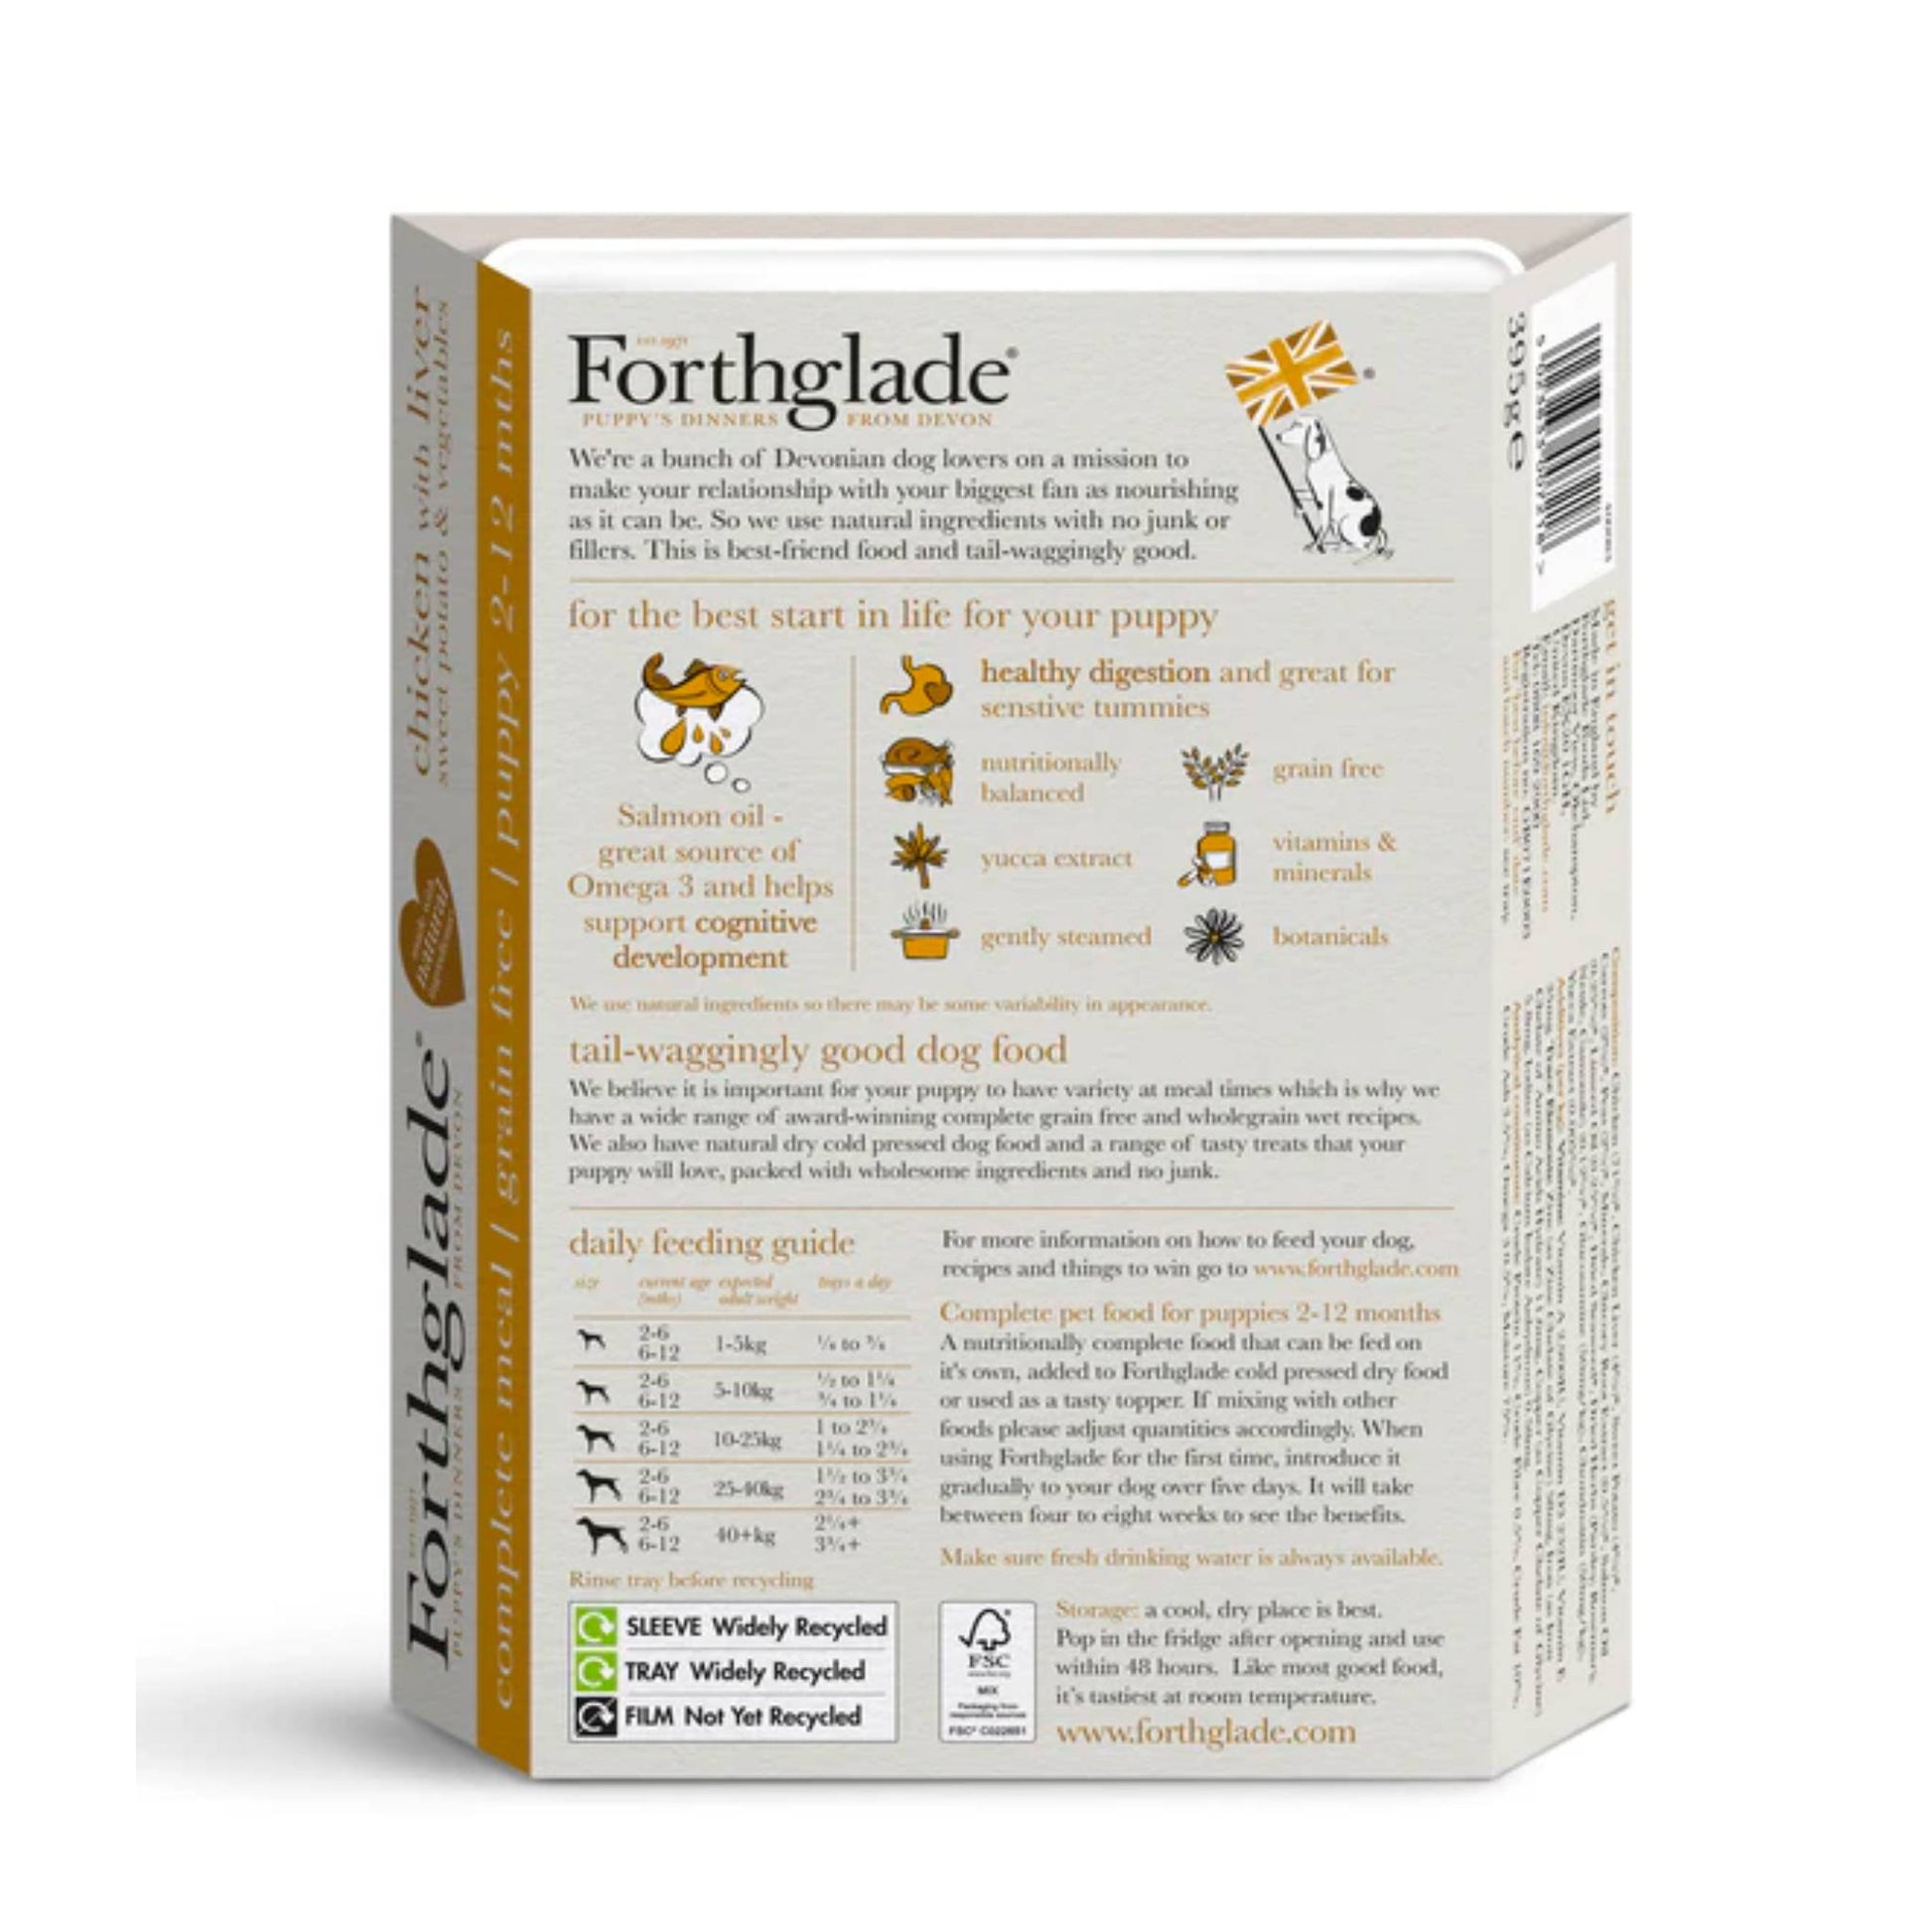 Forthglade chicken complete meal for puppies, feeding guide and ingredients. 